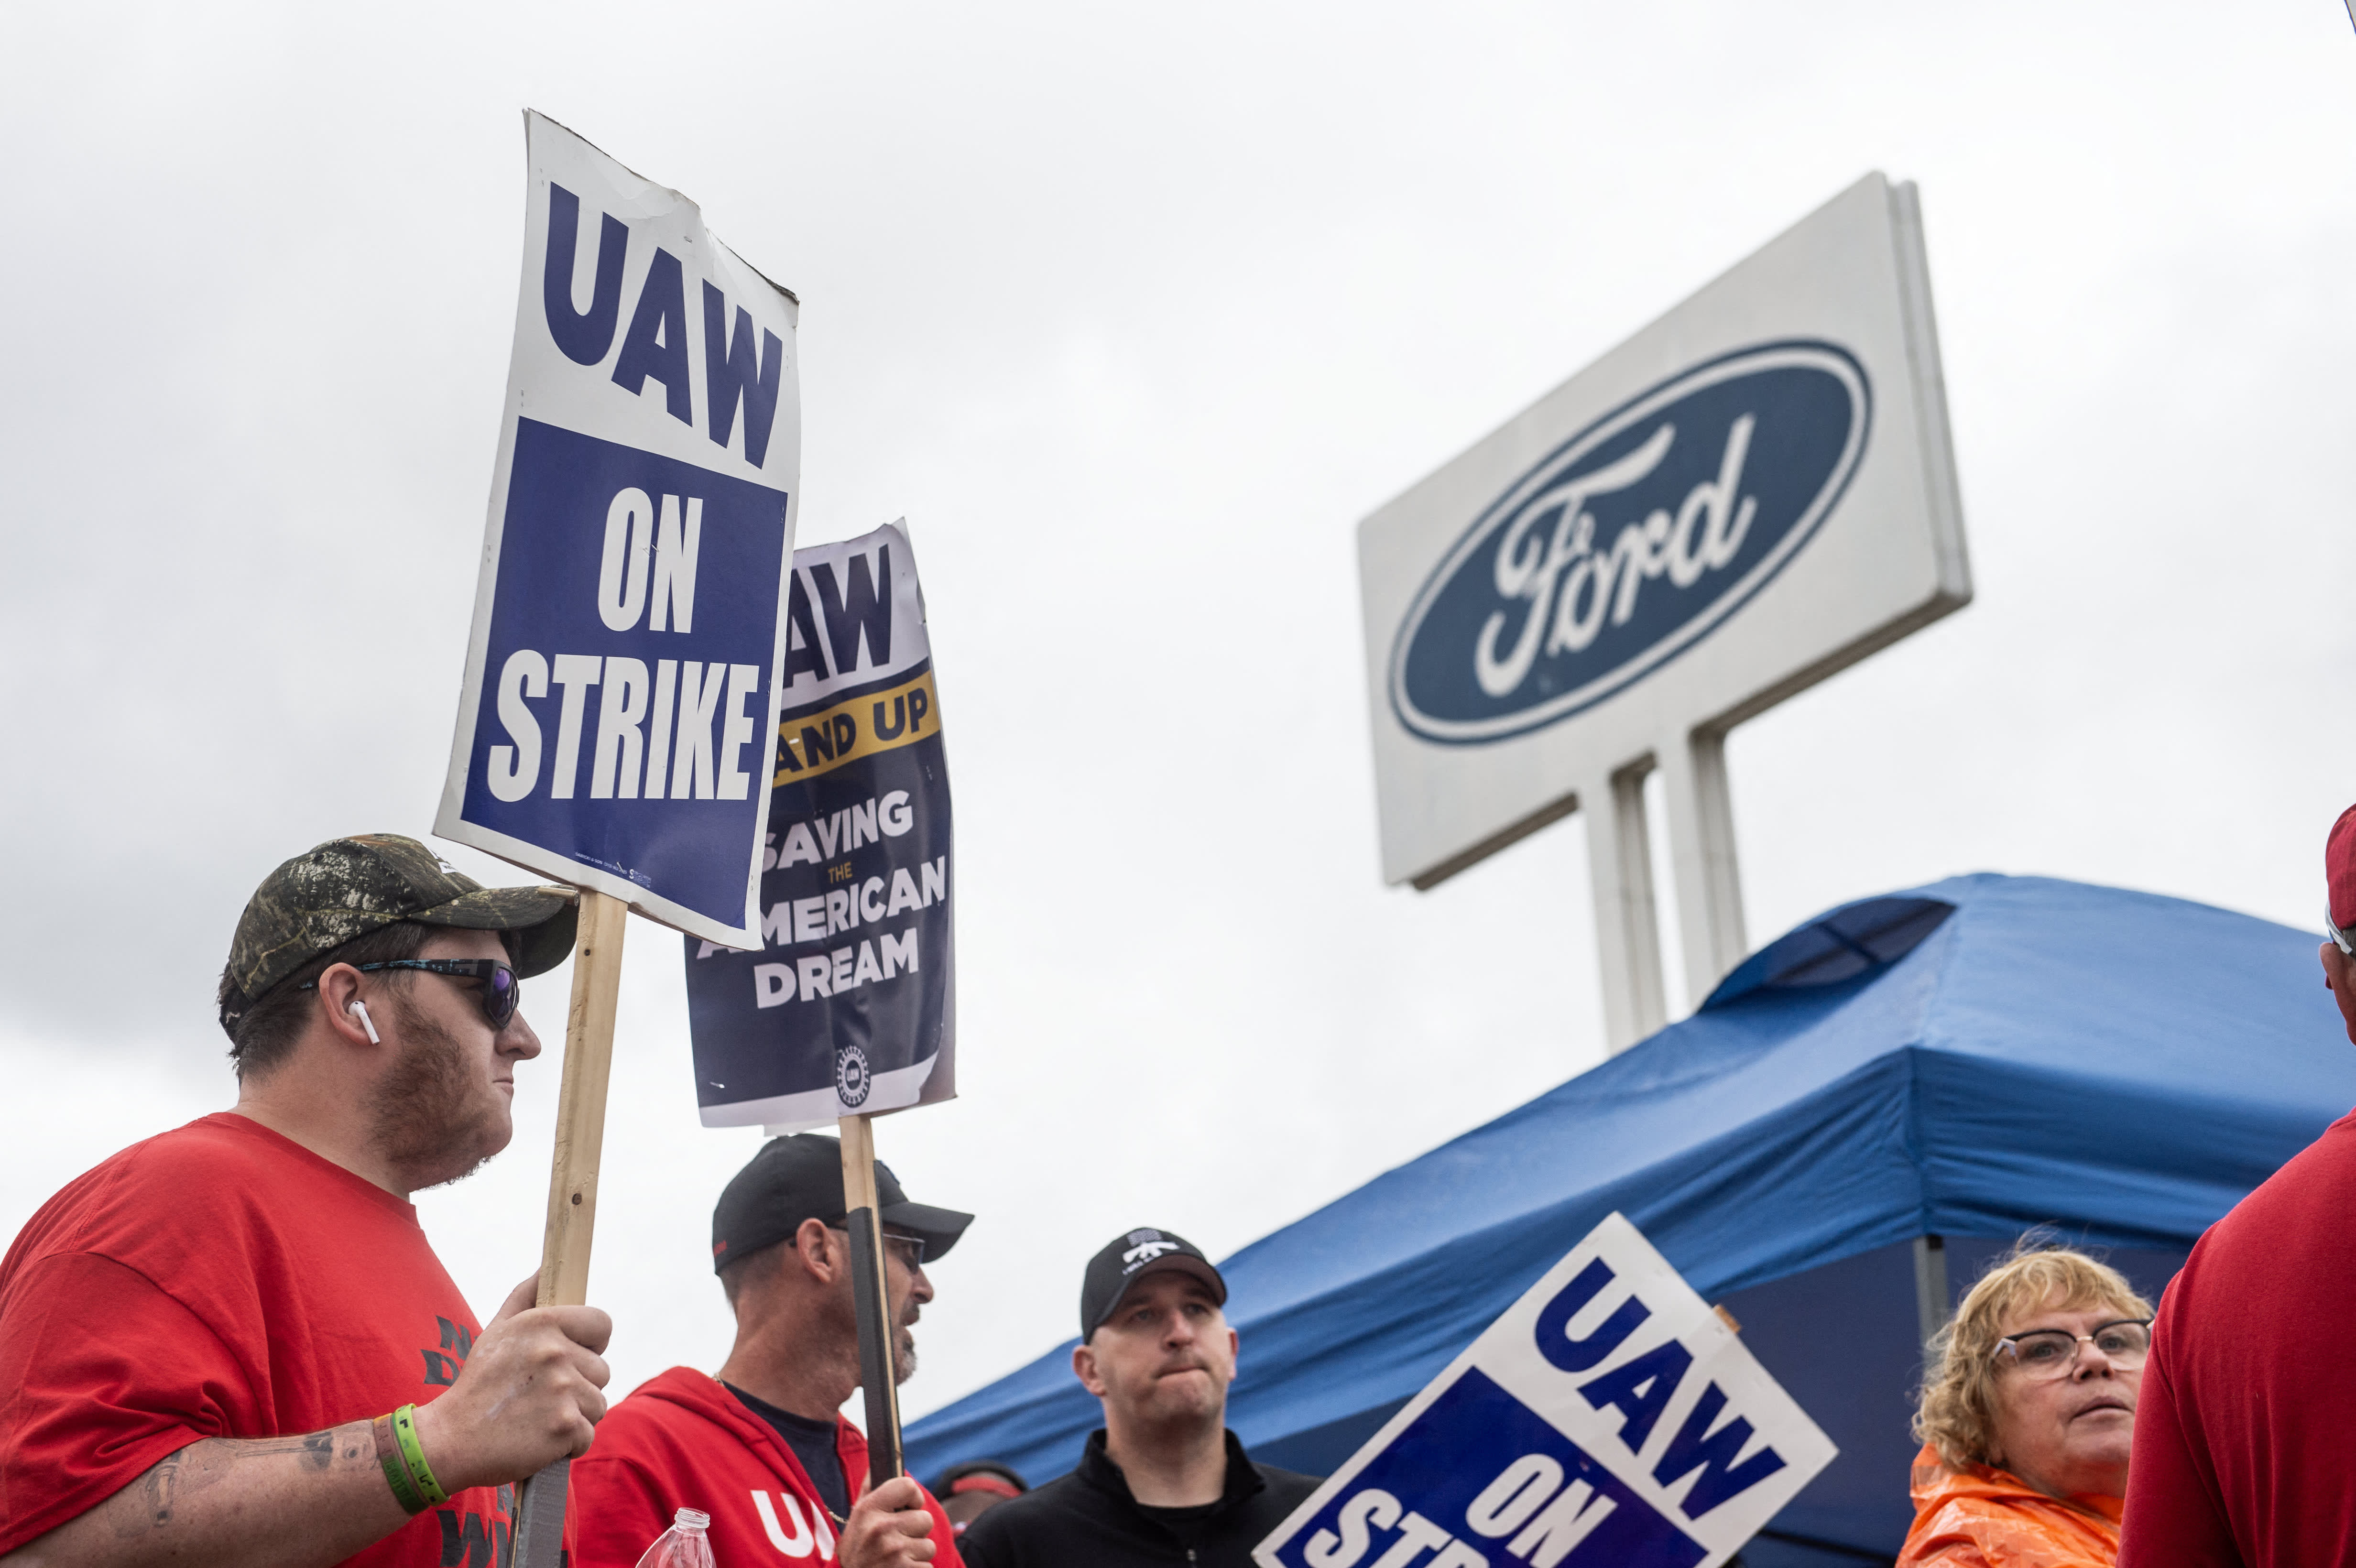 Ford CEO Farley says the UAW is stalling talks on electric vehicle battery factories